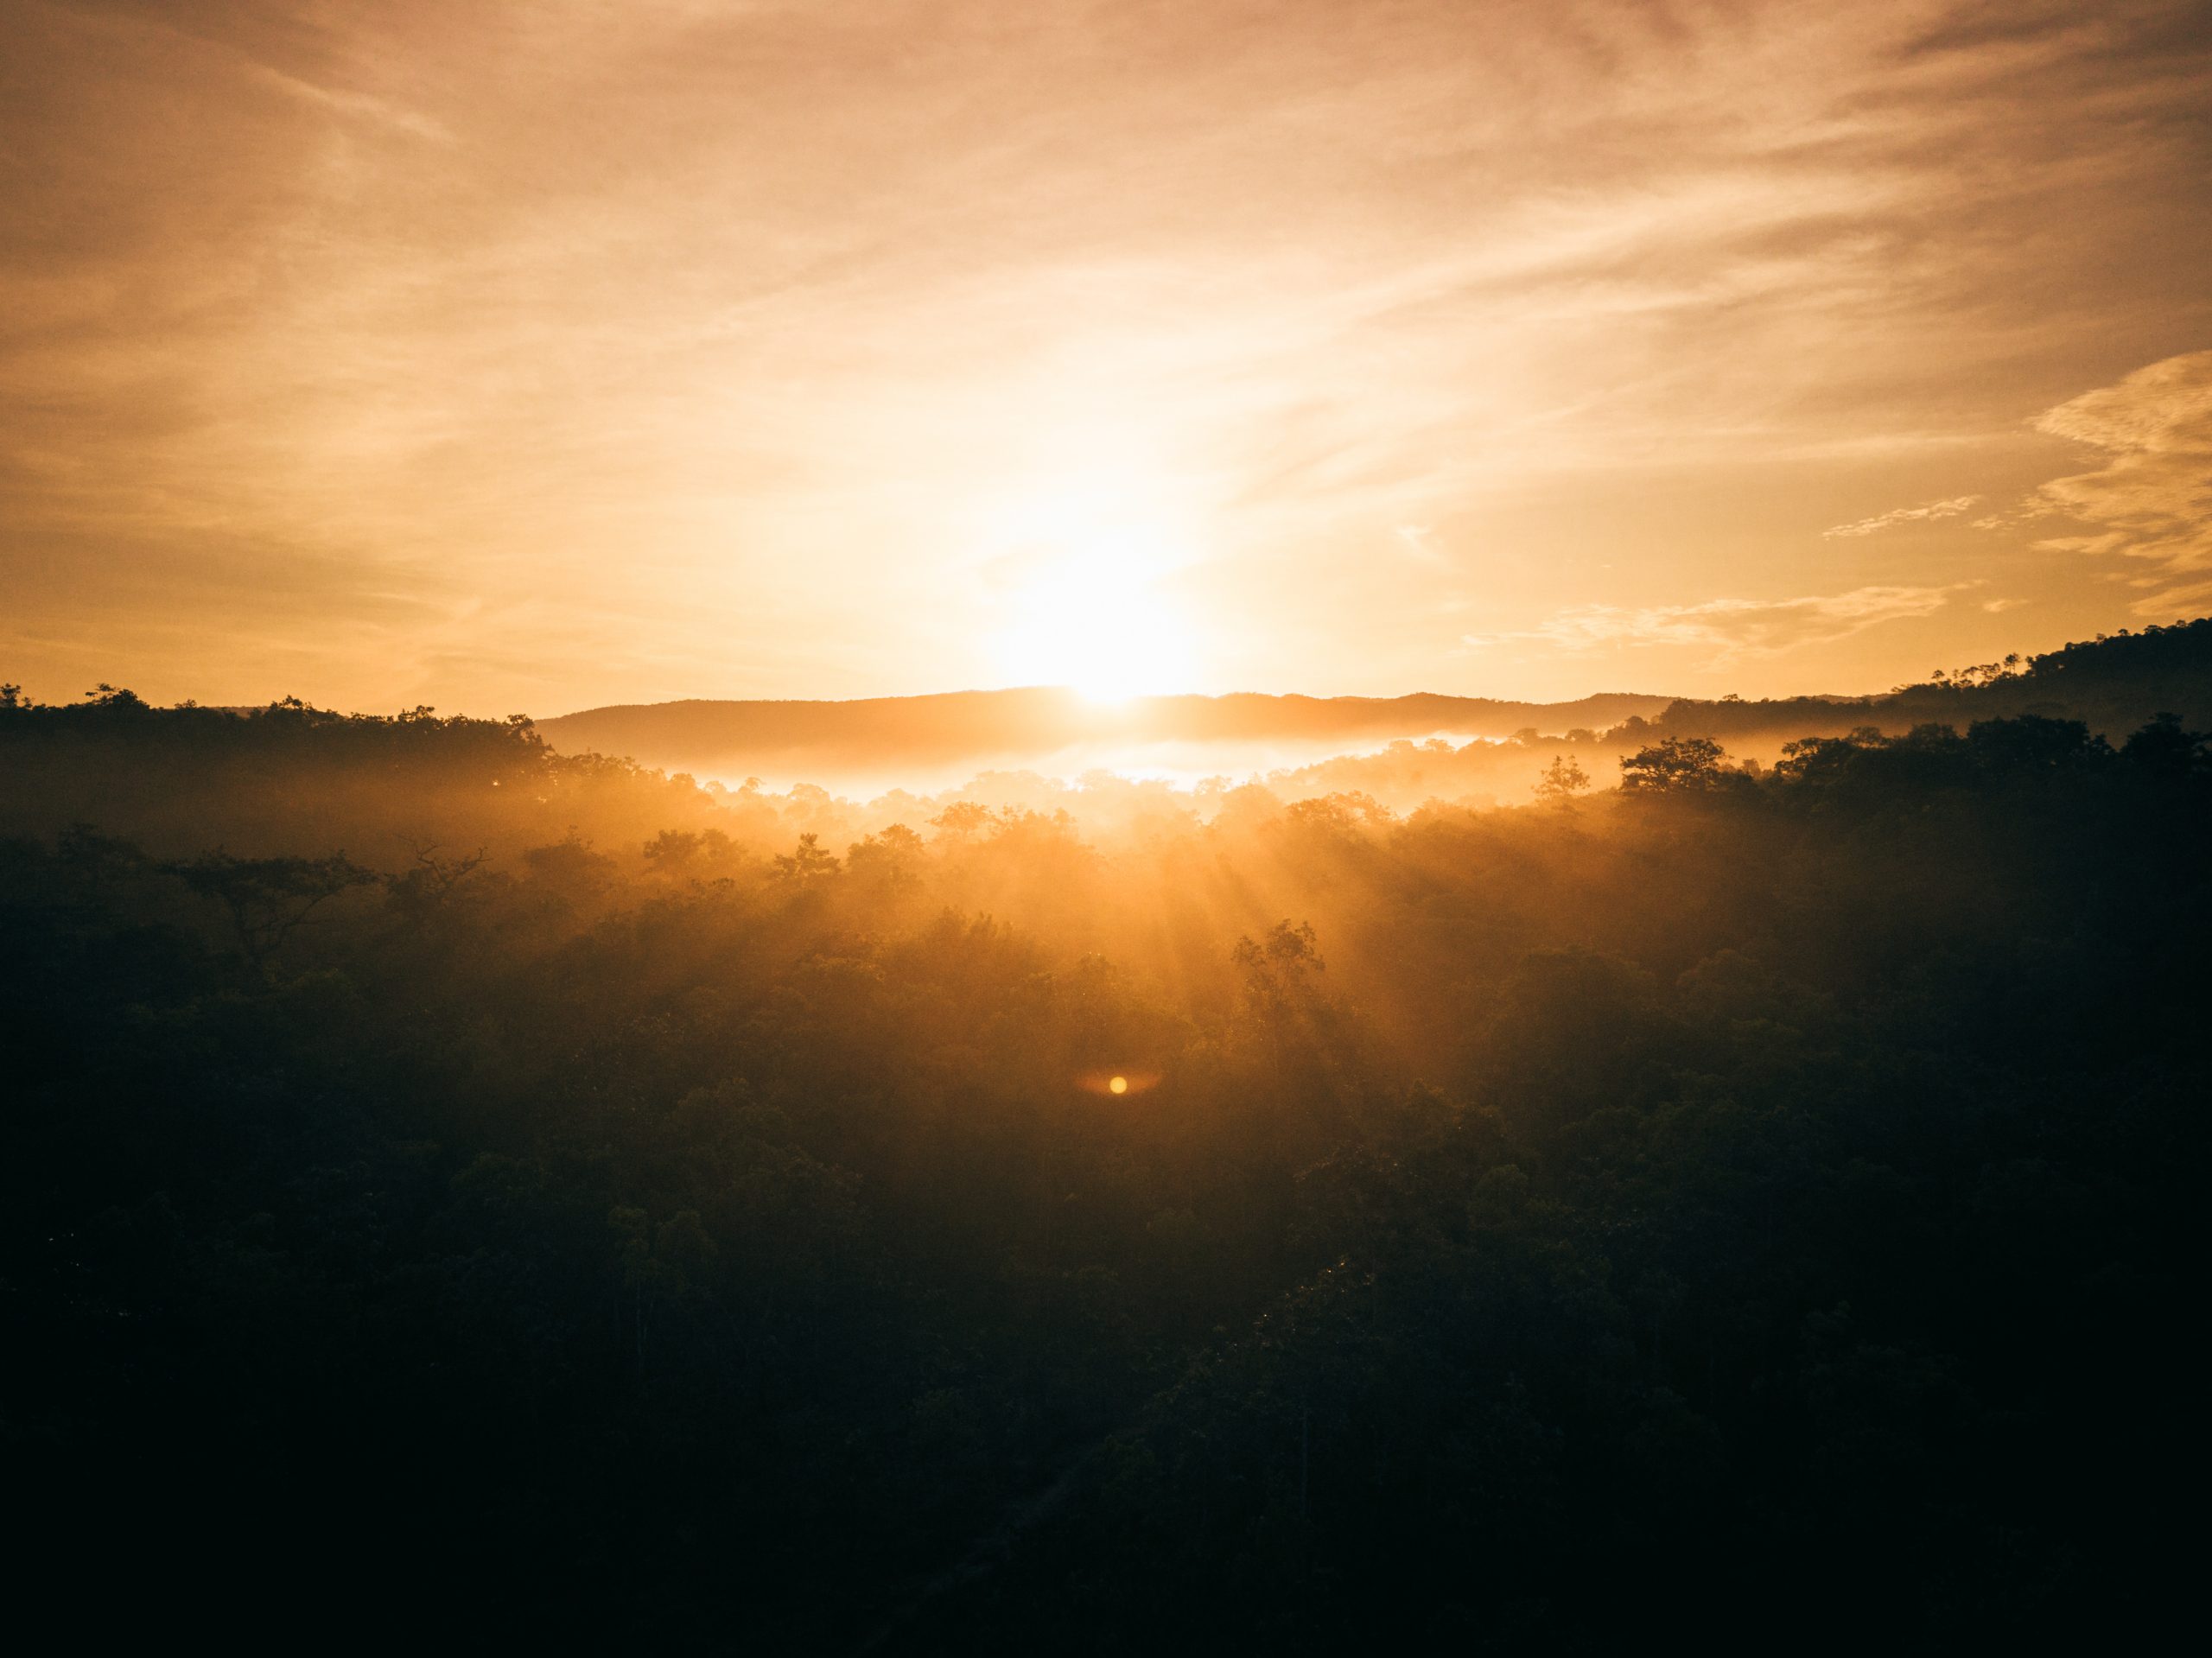 The sun rises over the rainforest in the Cardamom Mountains, Cambodia.